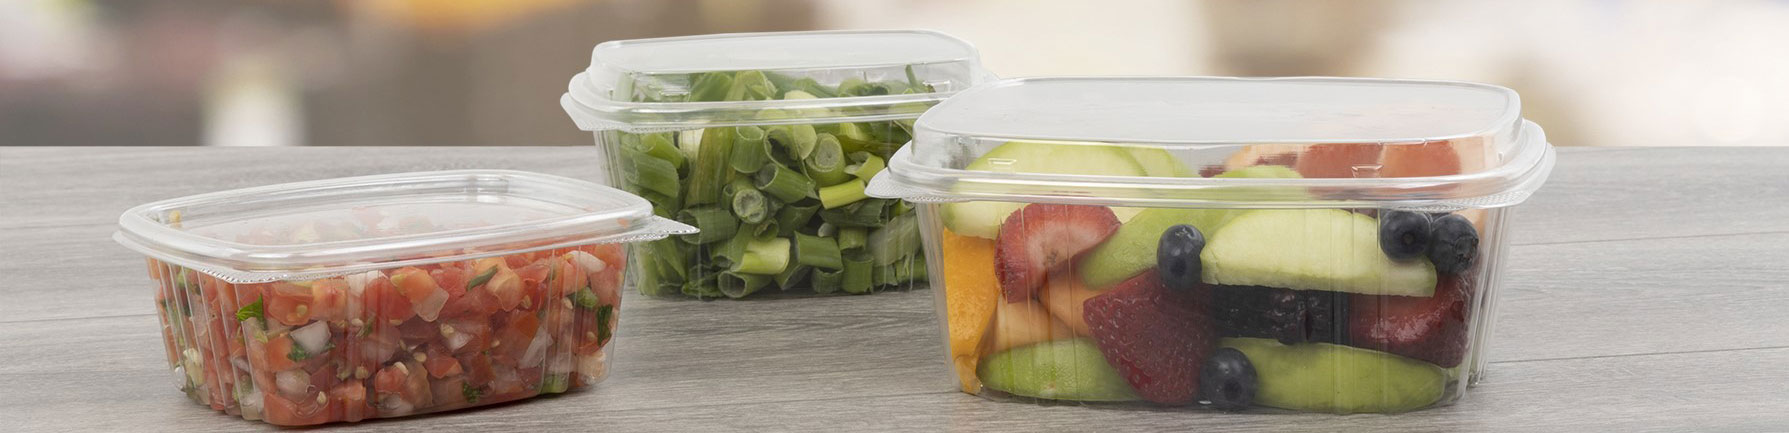 3 clear food containers filled with food and capped with lids